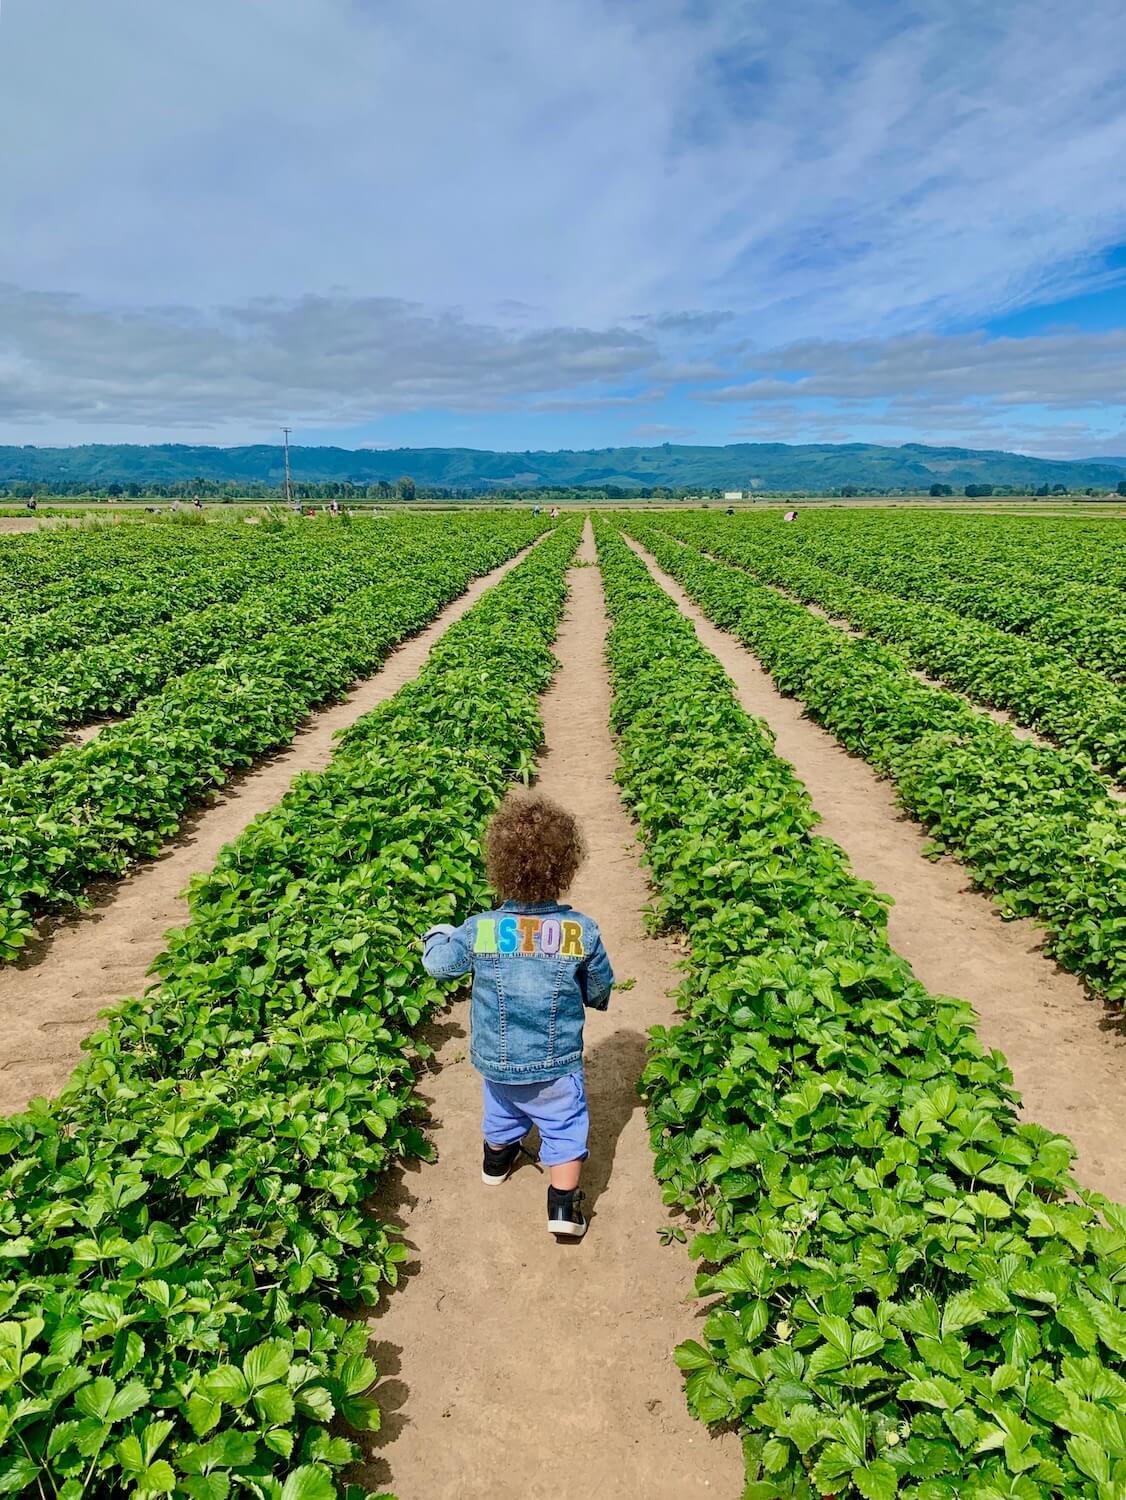 Sauvie Island is known for a variety of produce, including this strawberry farm.  A two year old boy with a jean jacket that says Astor and curly brown hair runs in between rows of strawberry plants, which run almost as far as the eye can see. On the horizon are faint green hills with a gray blue cloudy swirl of sky.